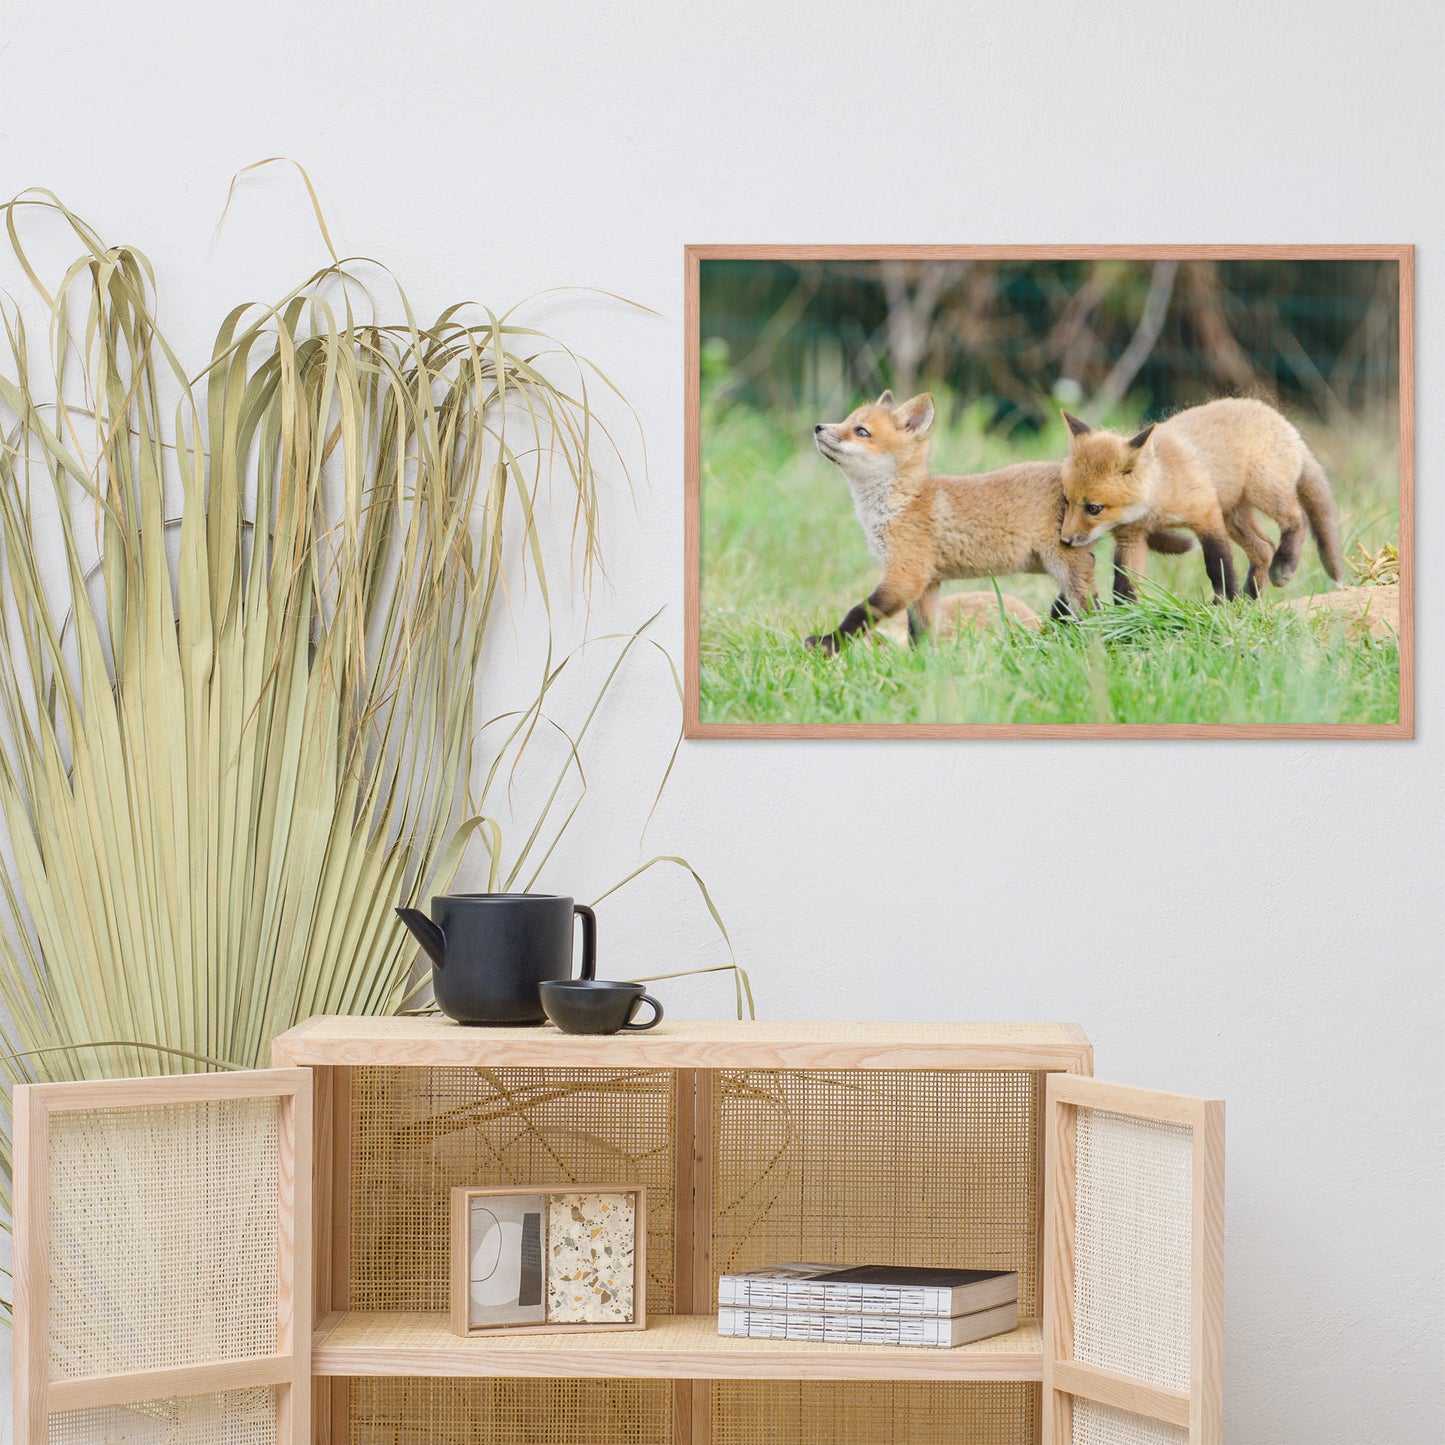 Wall Decor Childrens Room: Playful Baby Red Fox Pups In Field - Animal / Wildlife / Nature Artwork - Wall Decor - Framed Wall Art Print